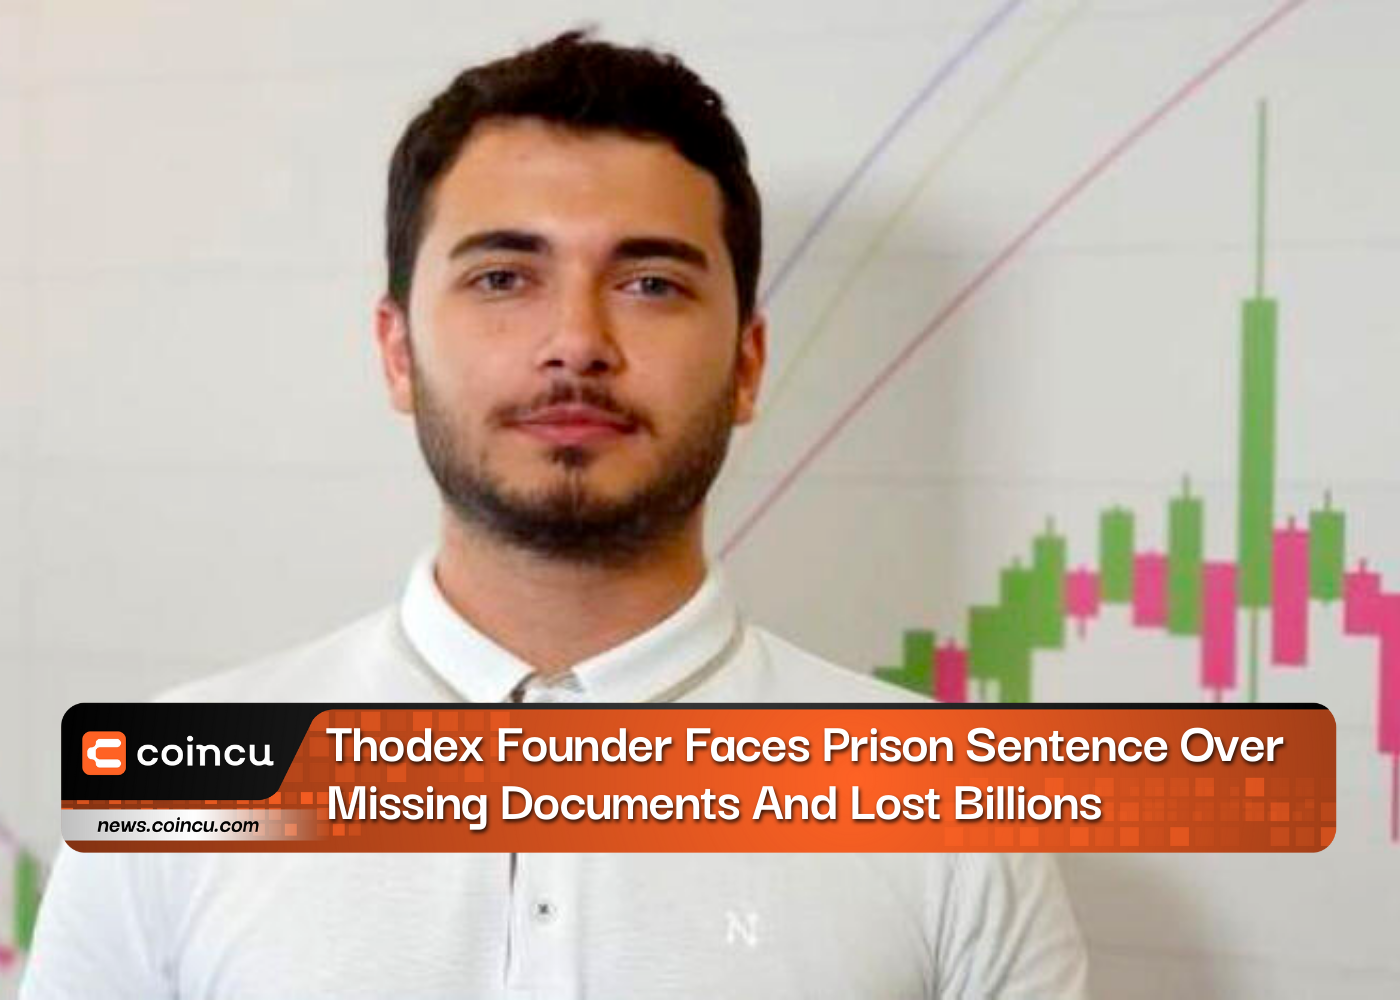 Thodex Founder Faces Prison Sentence Over Missing Documents And Lost Billions